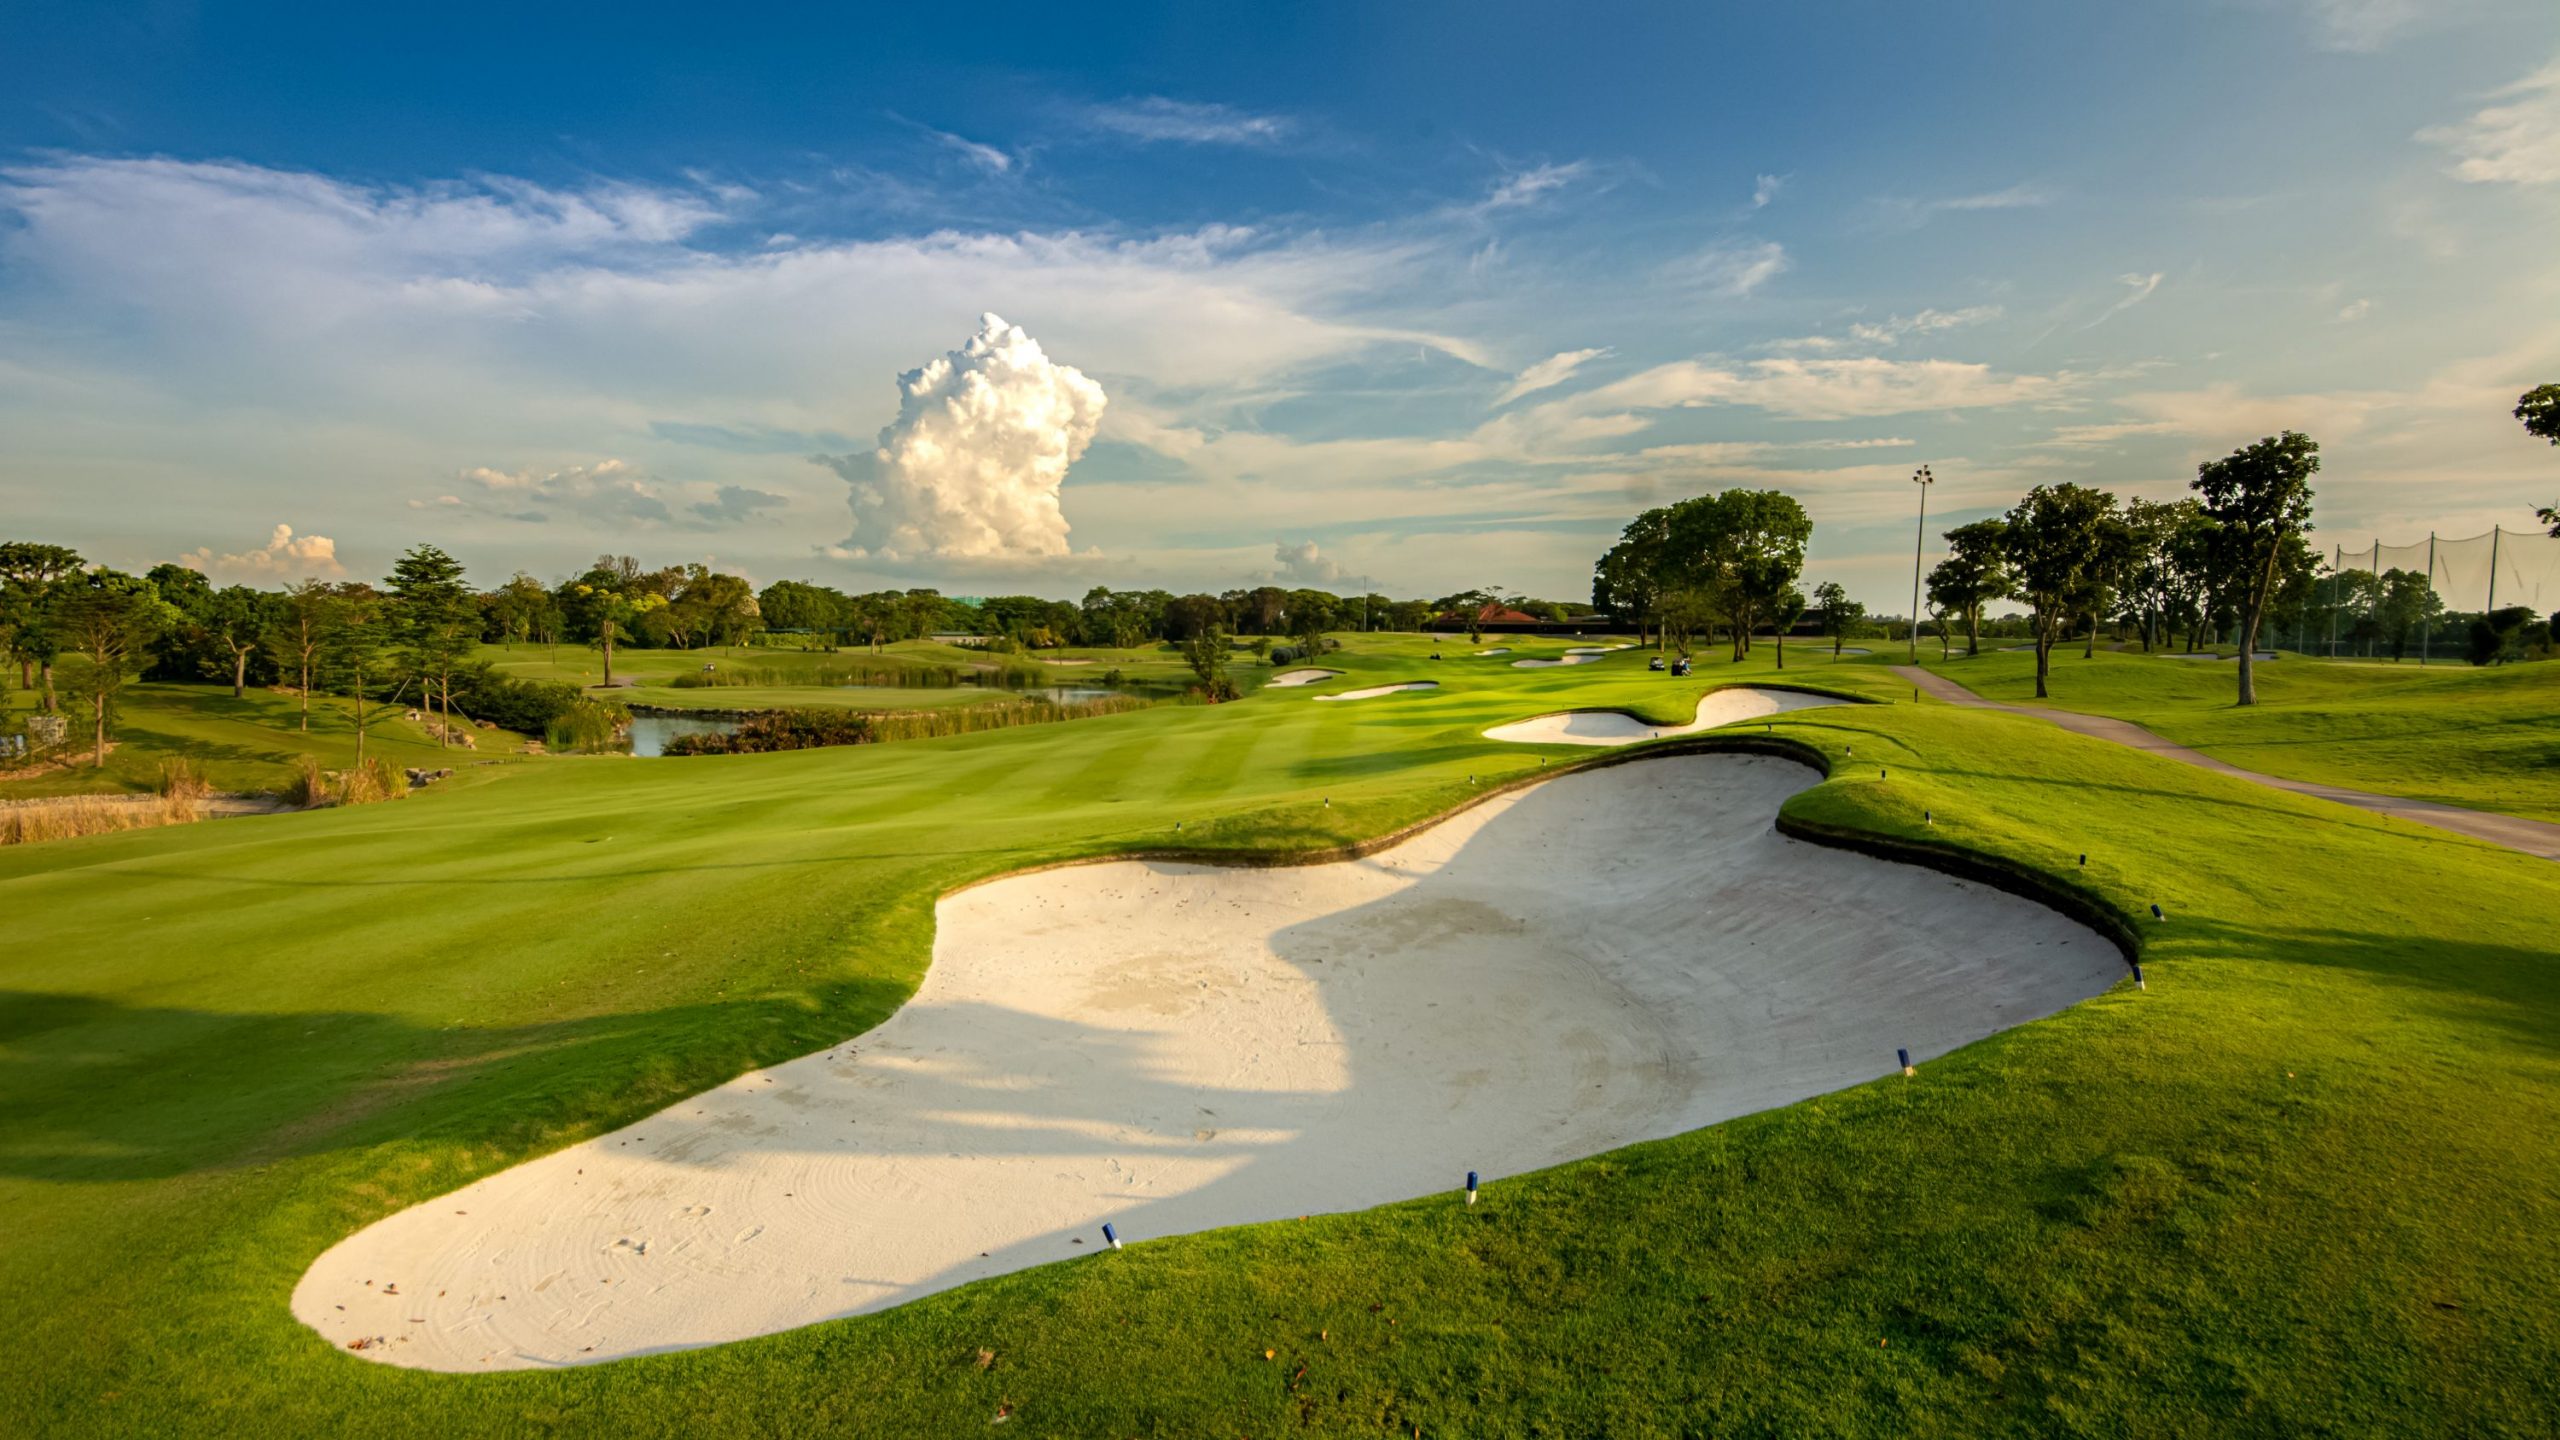 More Partners Q-School The Singapore International launched Published 20/12/2021 - 10:00:57 The Asian Tour are to enjoy a gripping finish its season next month after announcing today they will stage new event, The Singapore ...